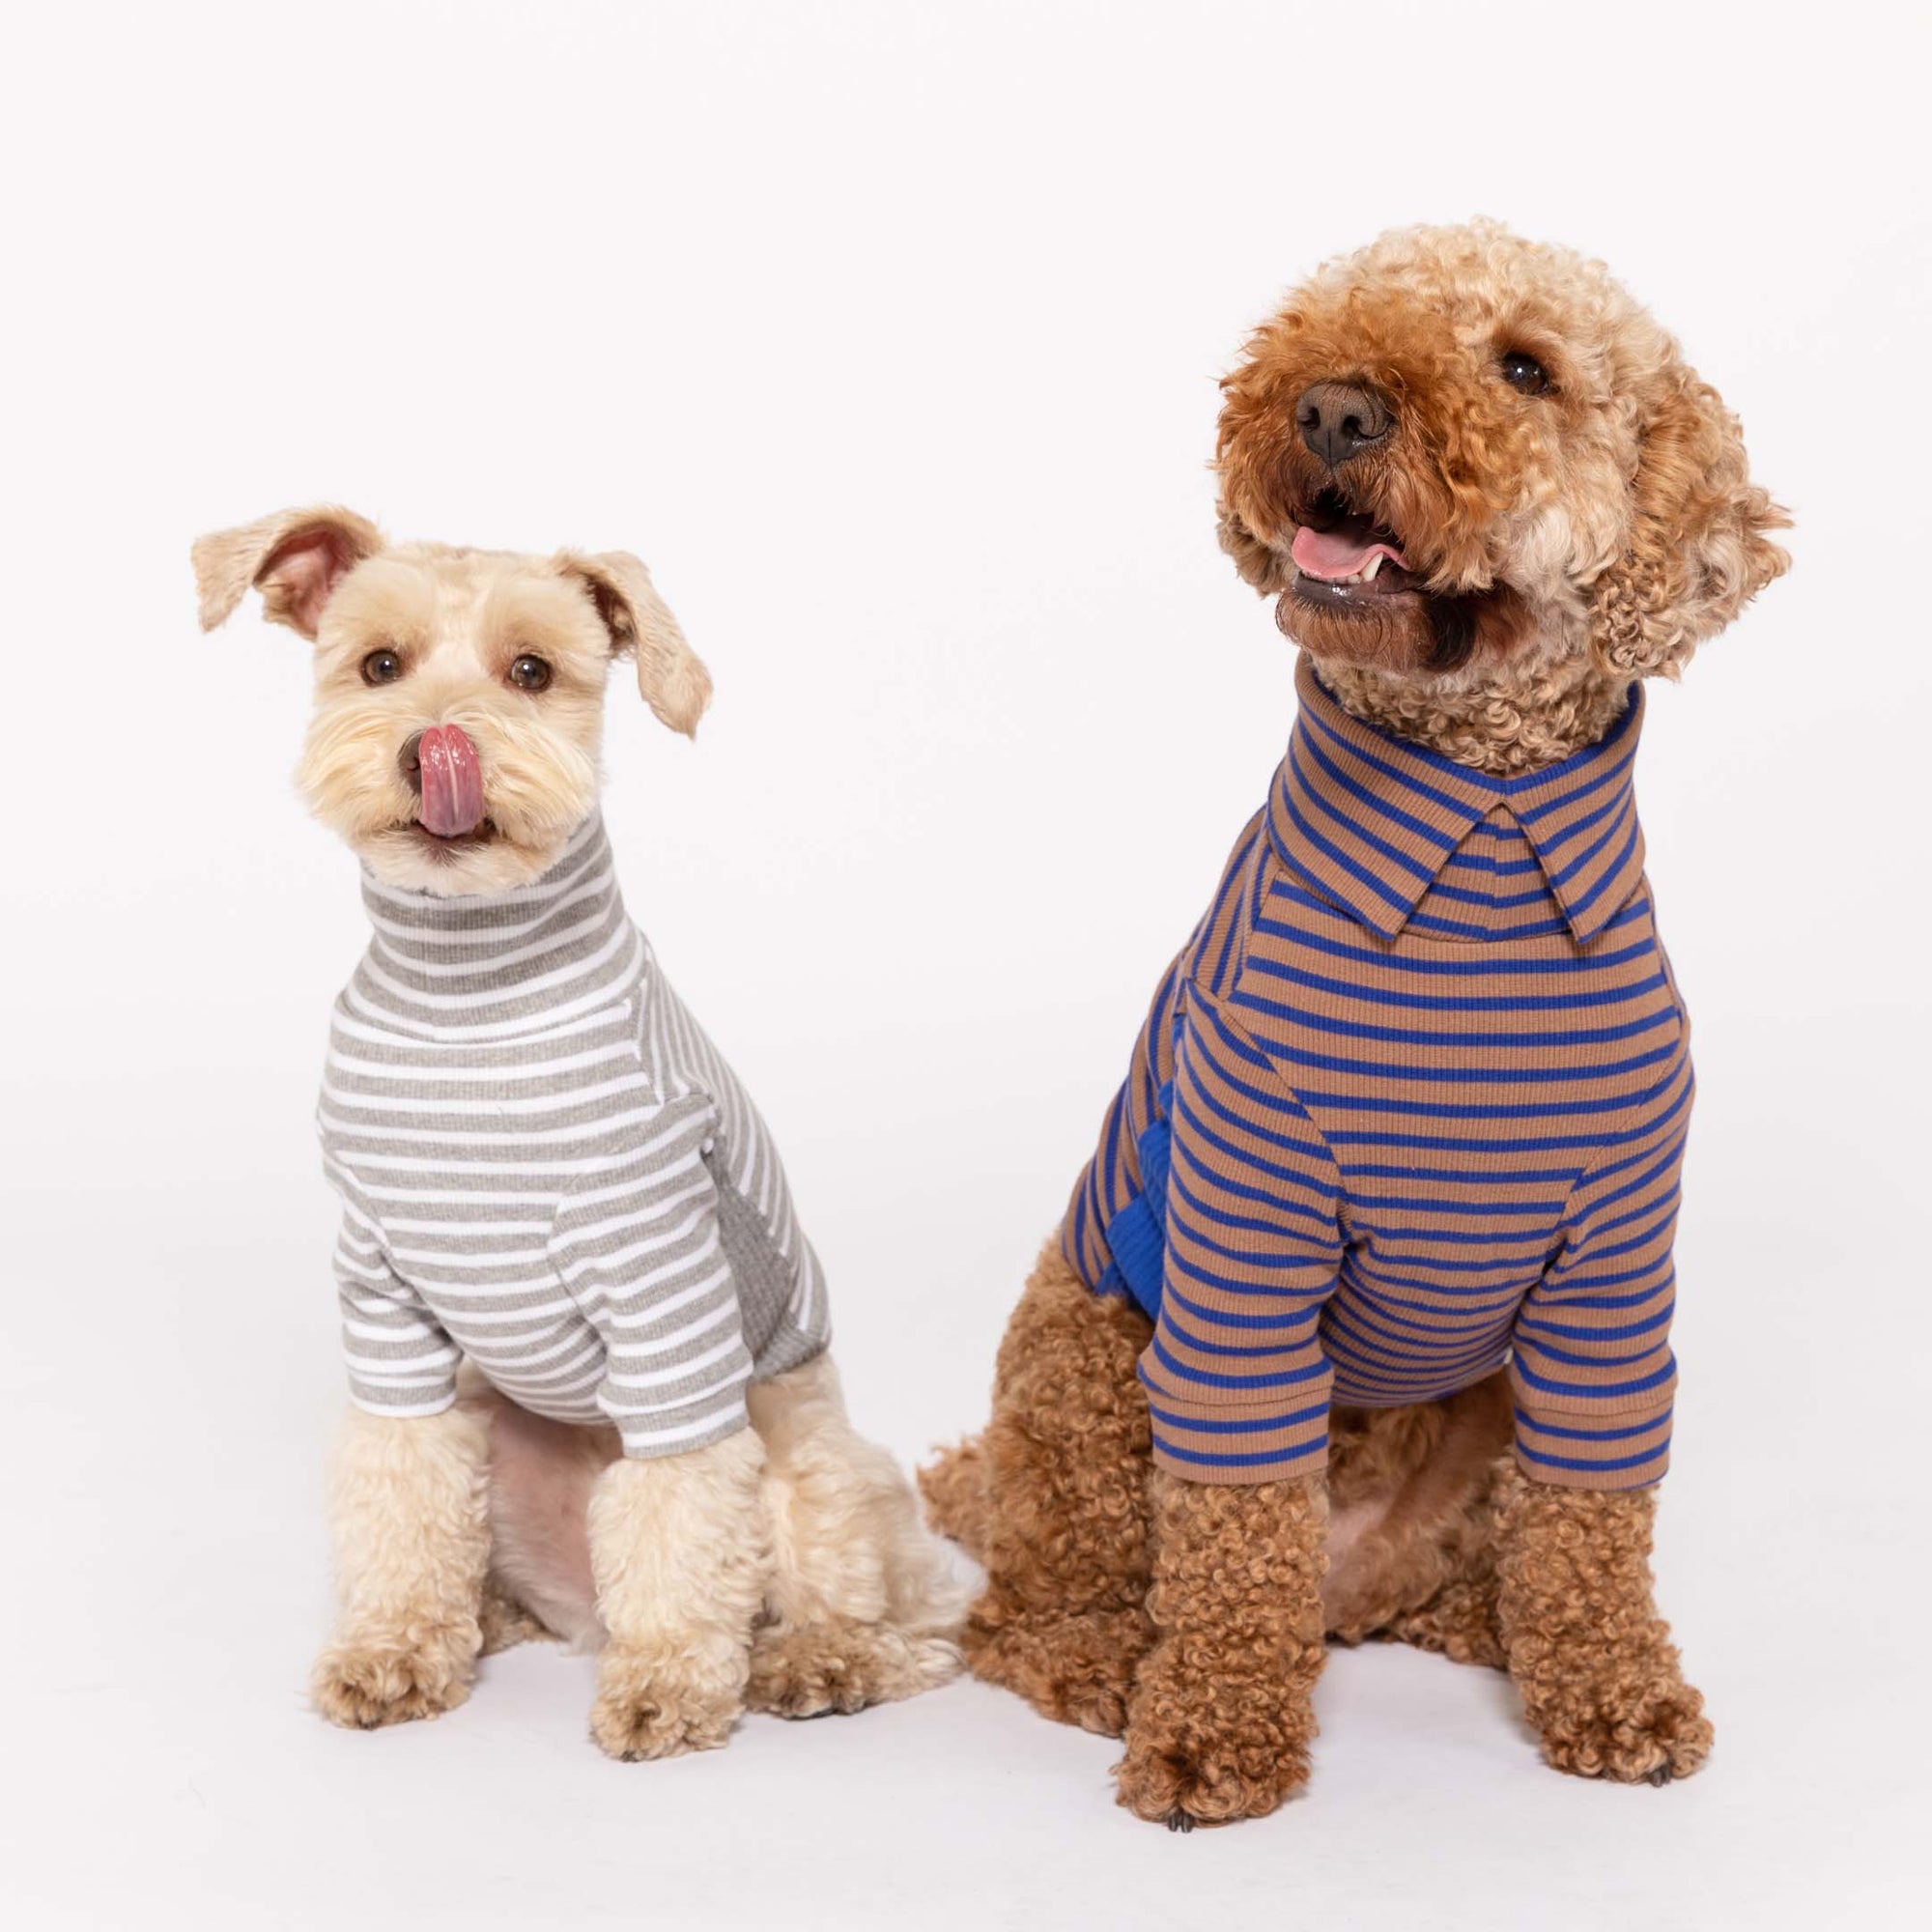 Two happy dogs in striped shirts: a Schnauzer in gray and a Poodle in Cobalt and Brown, showcasing coordinated pet fashion.